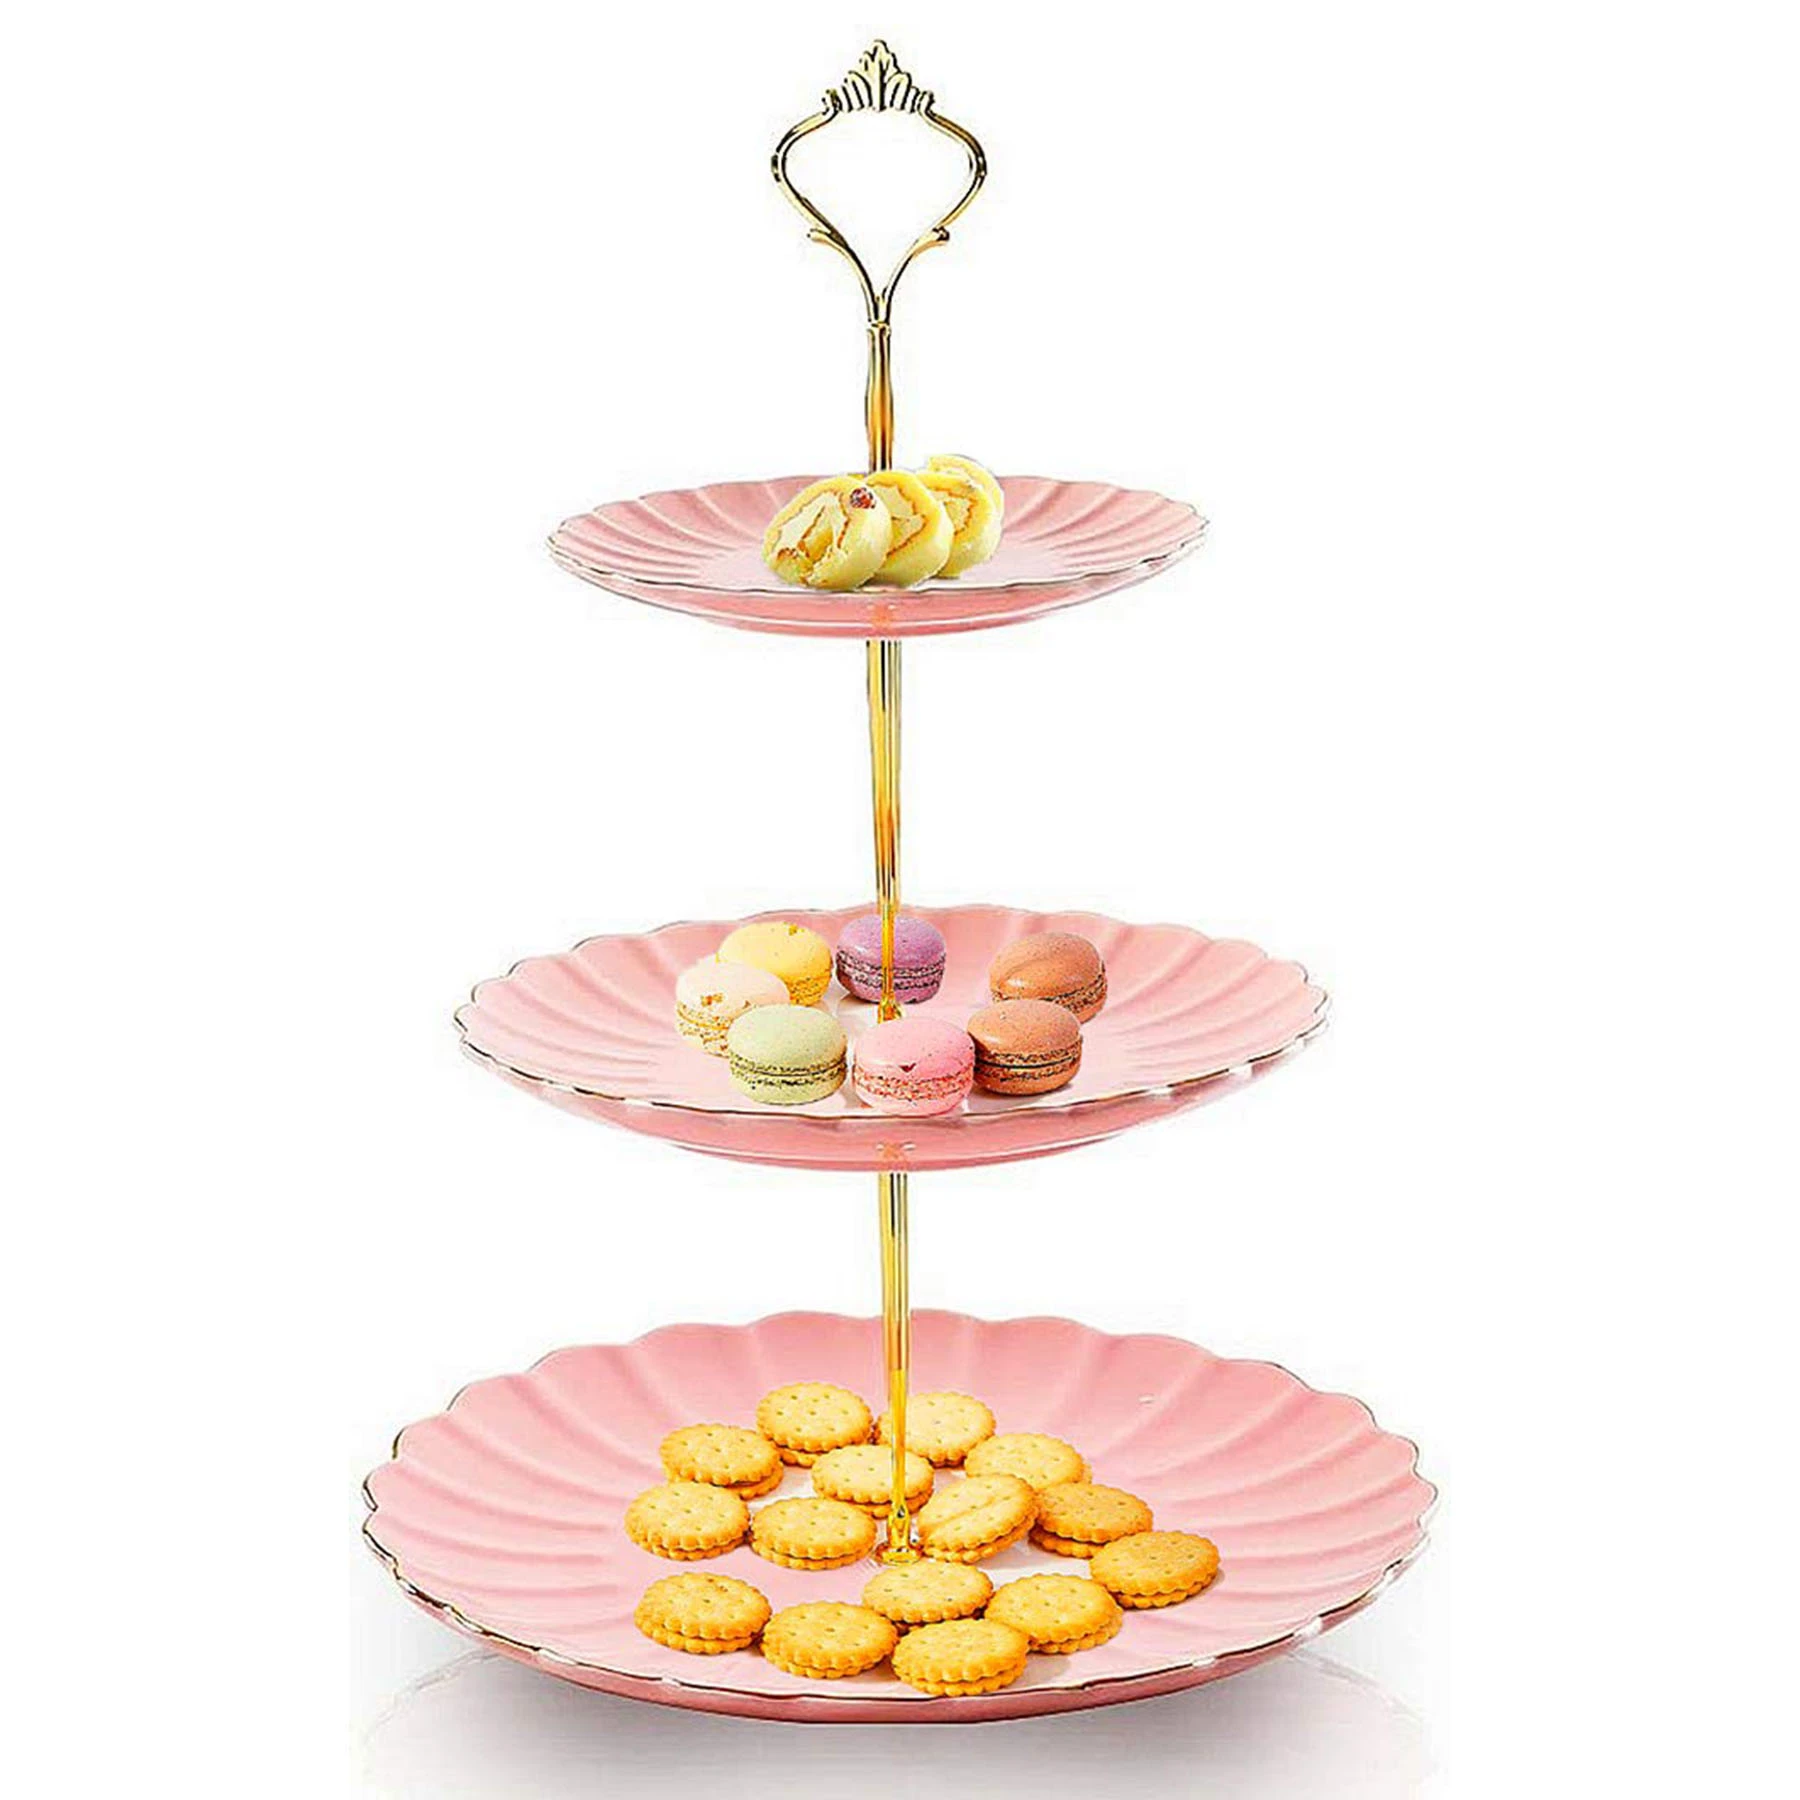 Ceramic Table Ware Dessert Fruit Holder Serving Plate 3 Tier Dish Tray Wedding Cup Cake Stand